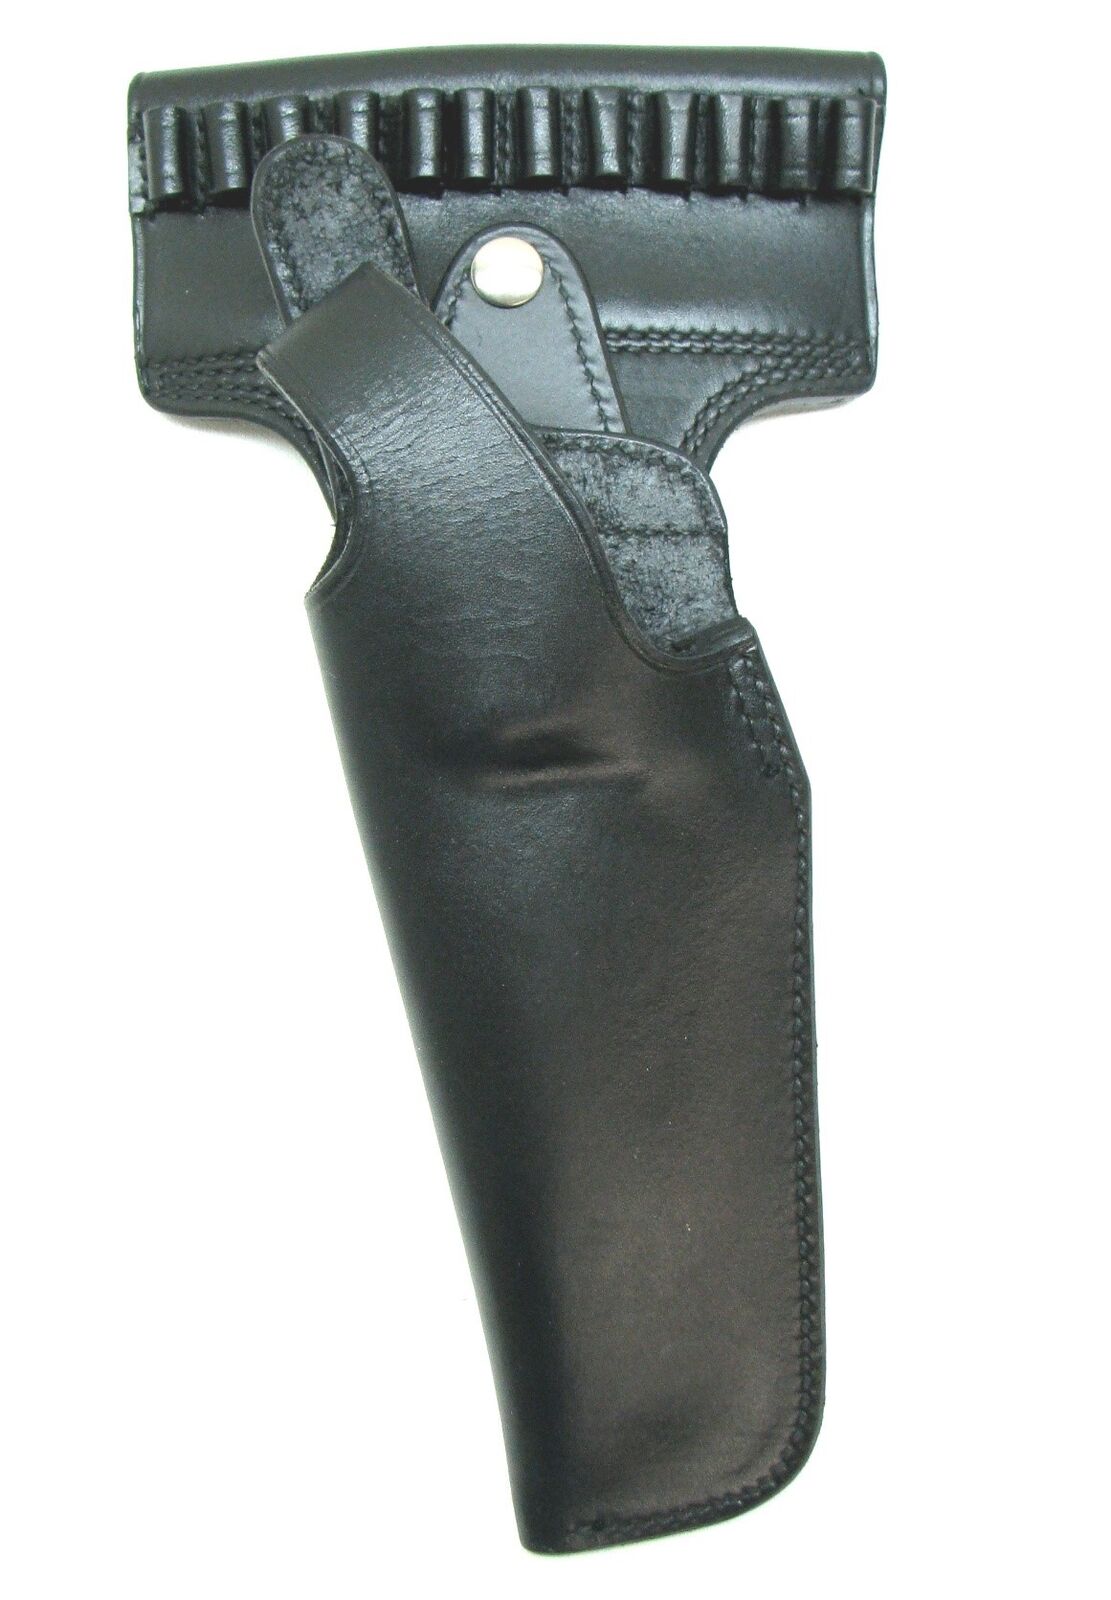 Holster fits 6-inch Revolvers, Smith & Wesson, Ruger, Colt